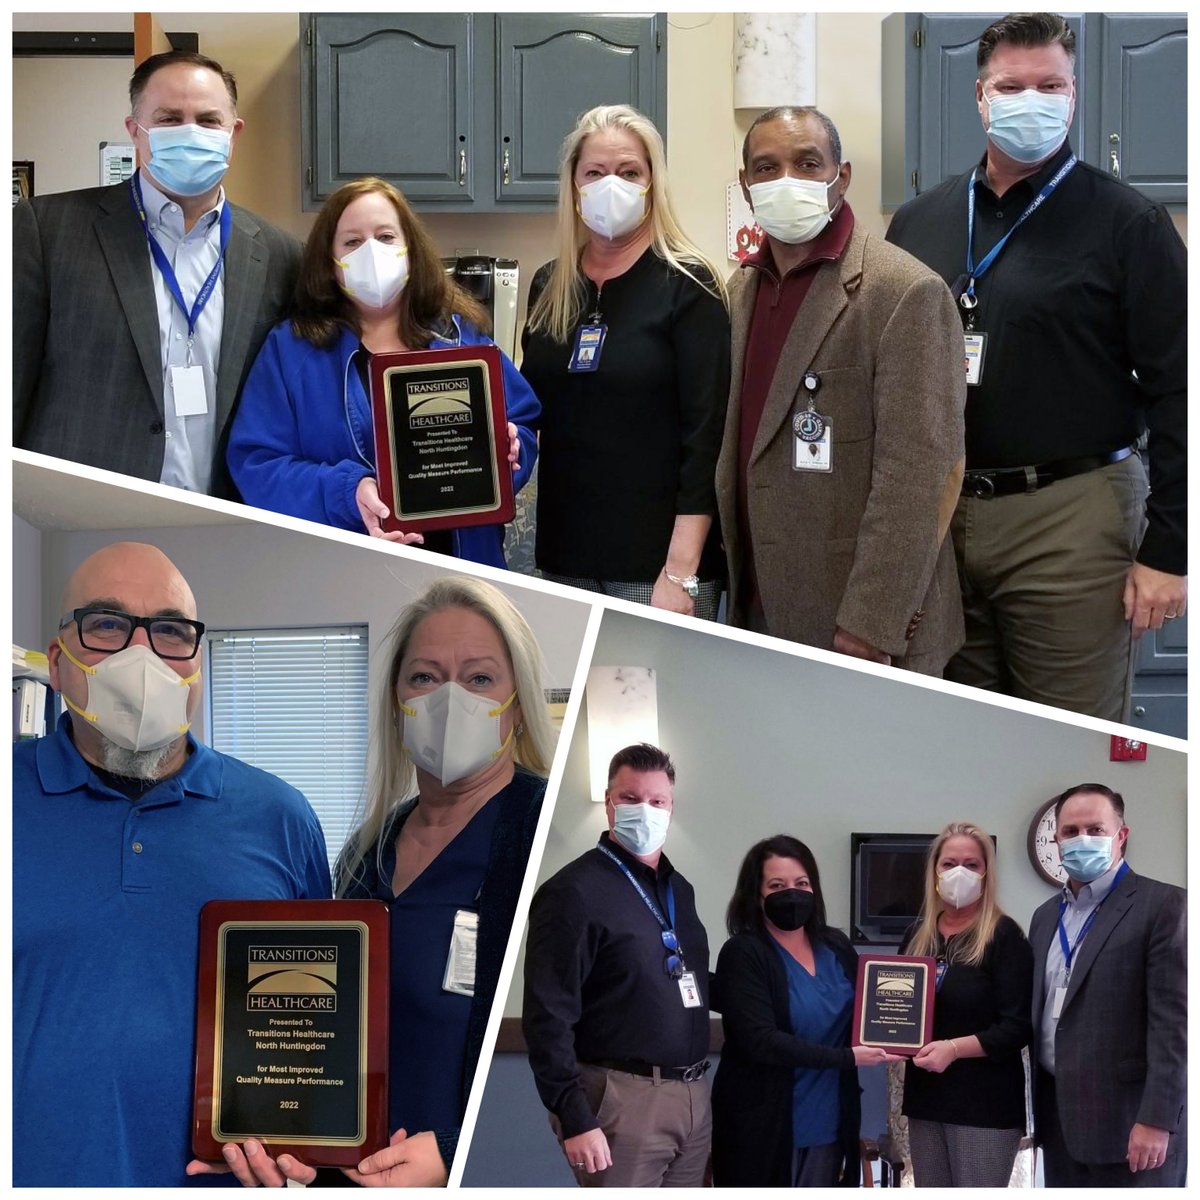 #Congratulations to @TRHCLLC #NorthHuntingdon in being recognized for “Most Improved #Quality Measures Performance” in 2022! Read the full #story: bit.ly/trhcnh-qual-aw…